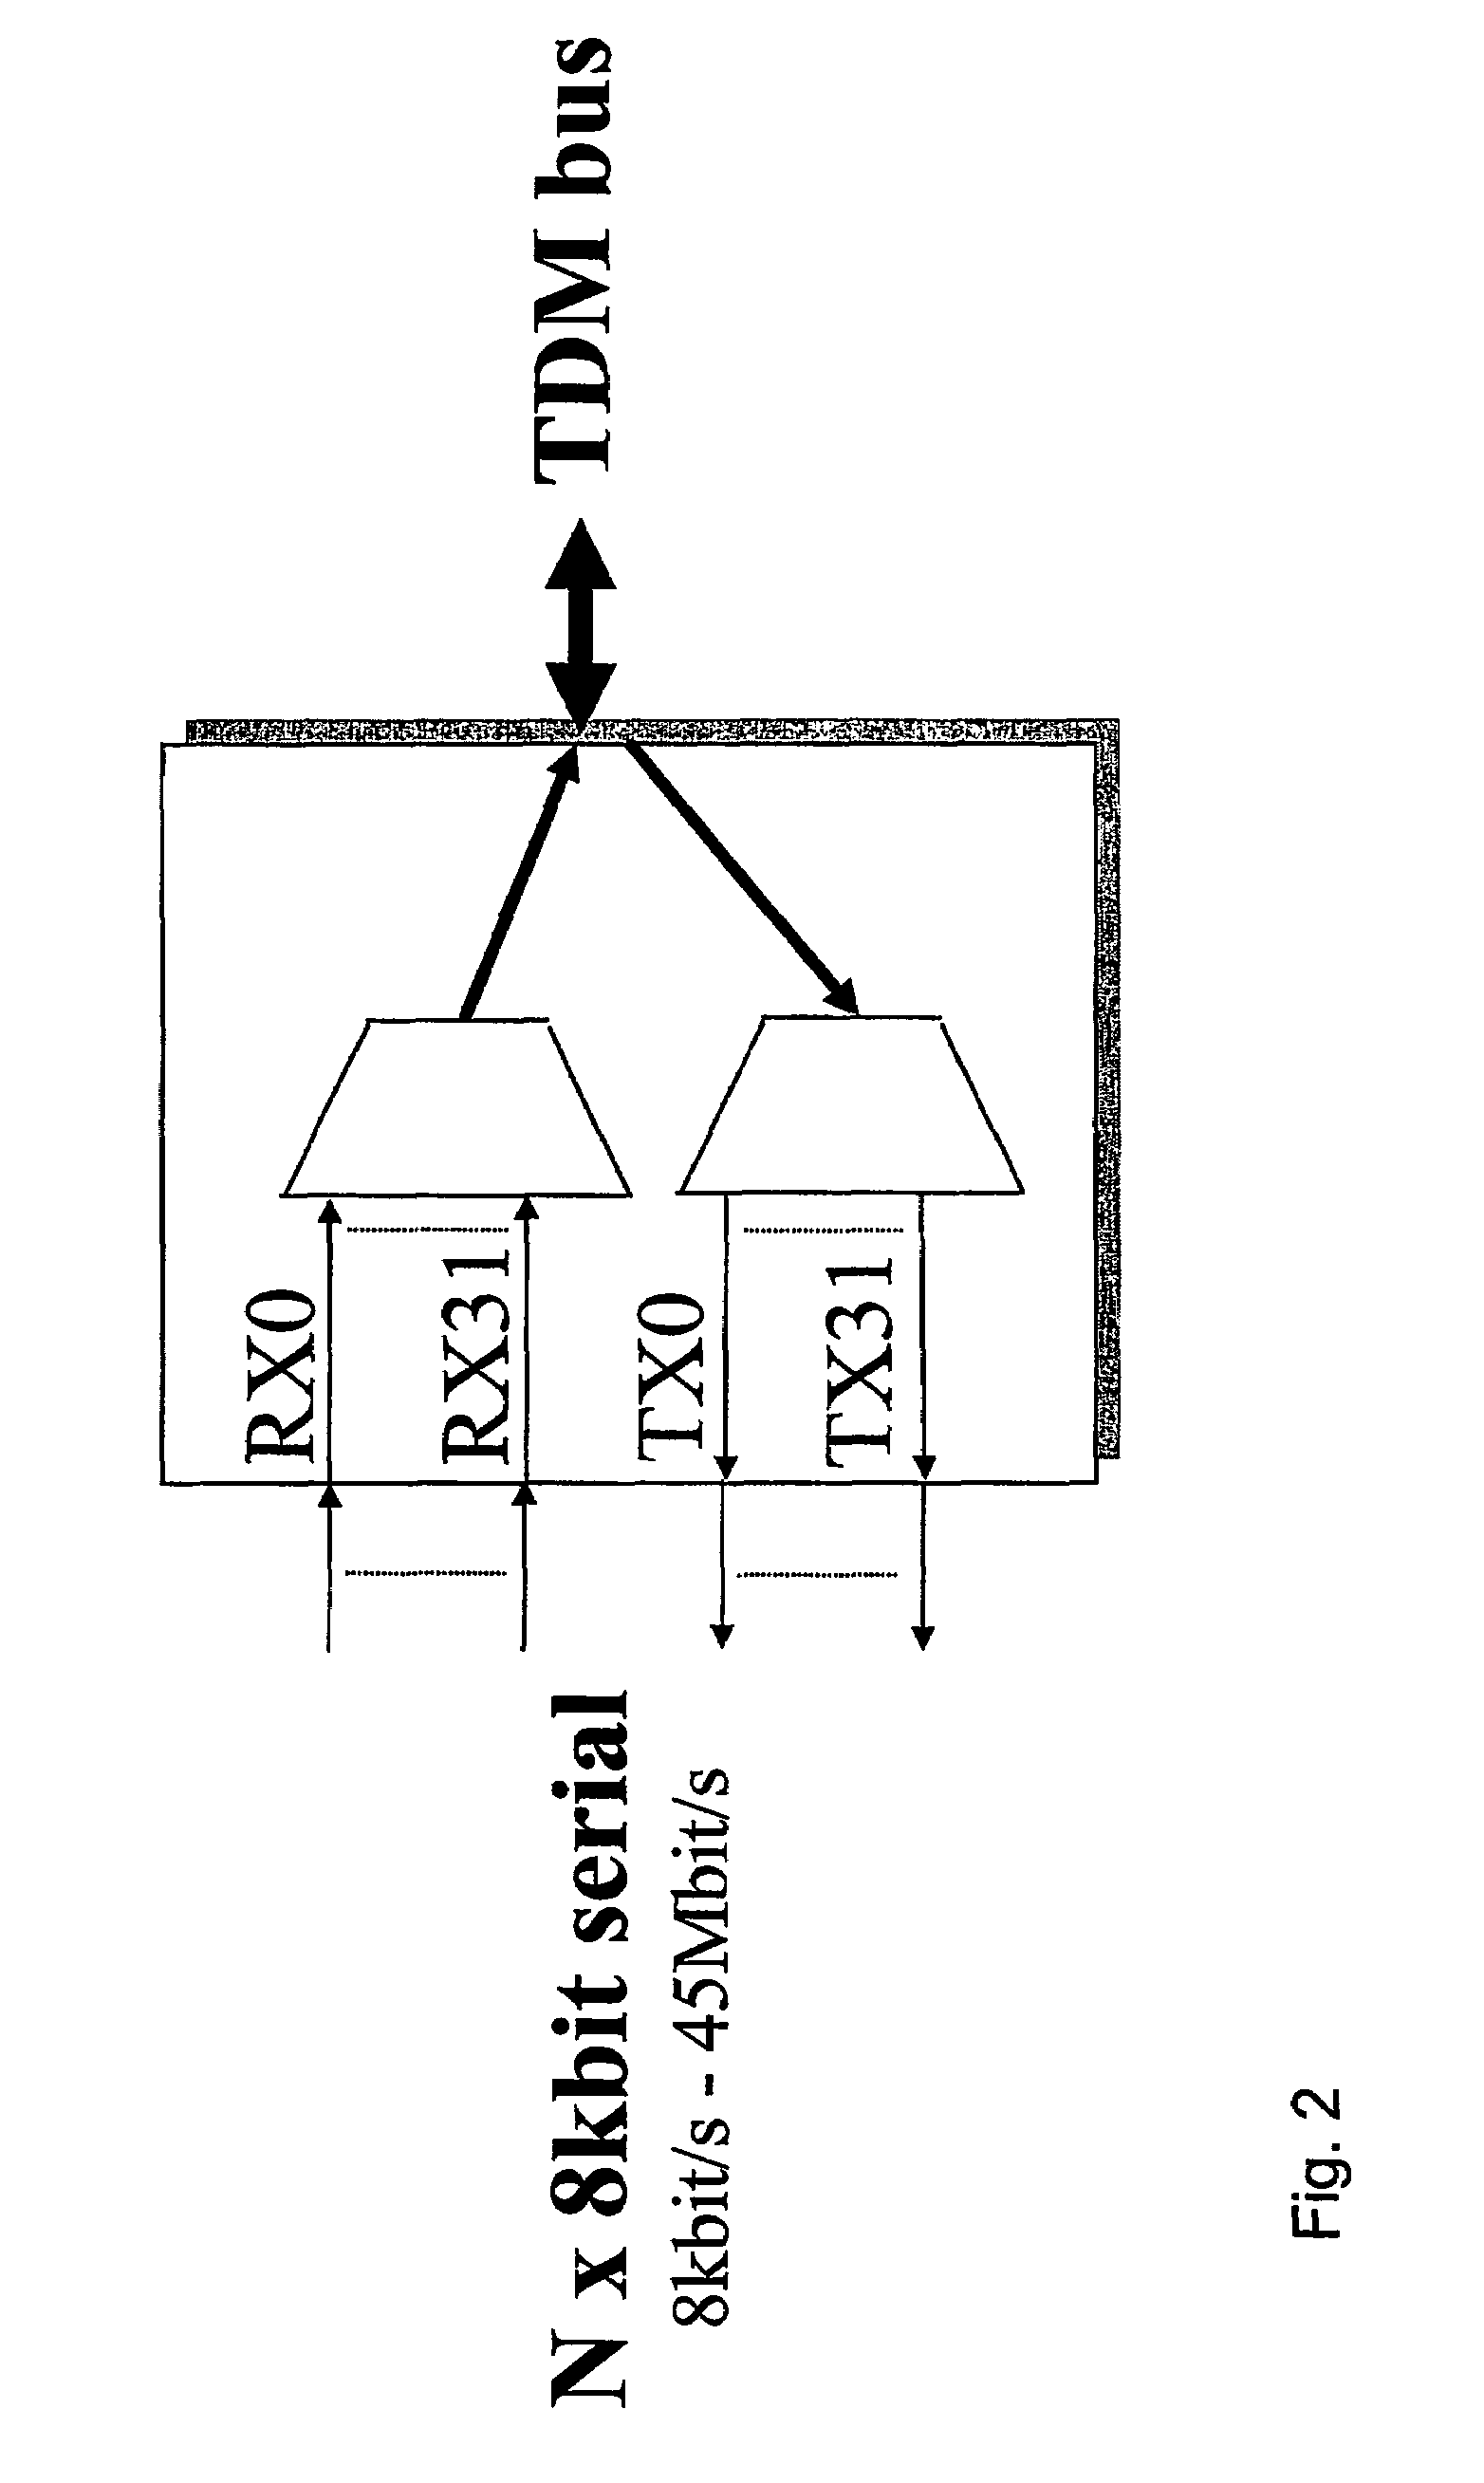 Rate adaption within a TDM switch using bit stuffing